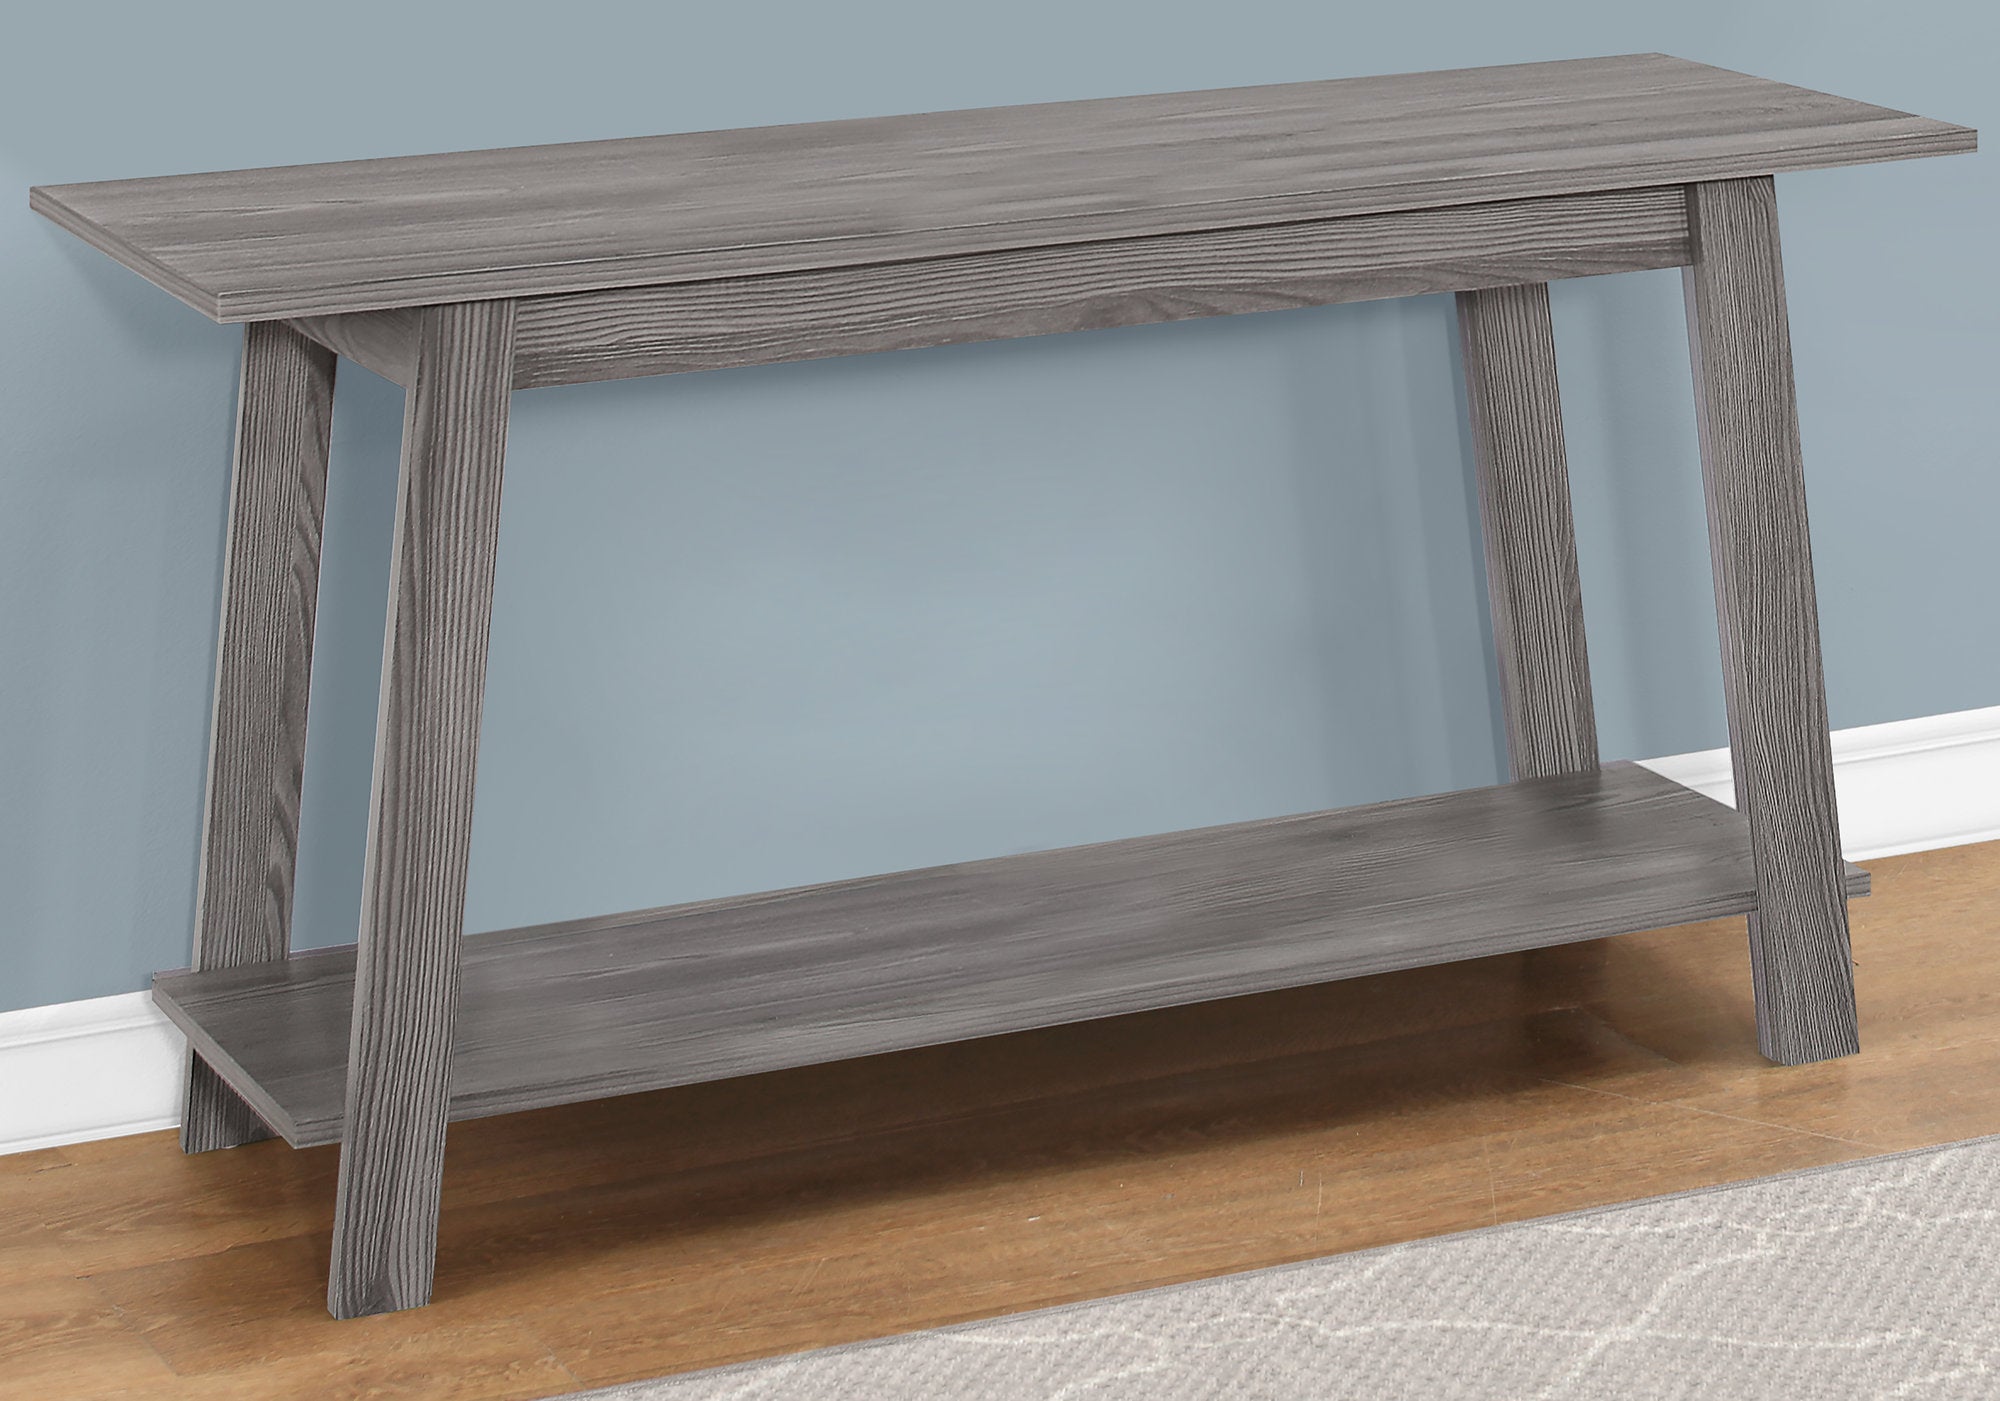 15.75" x 42" x 22.5" Grey Particle Board Laminate TV Stand